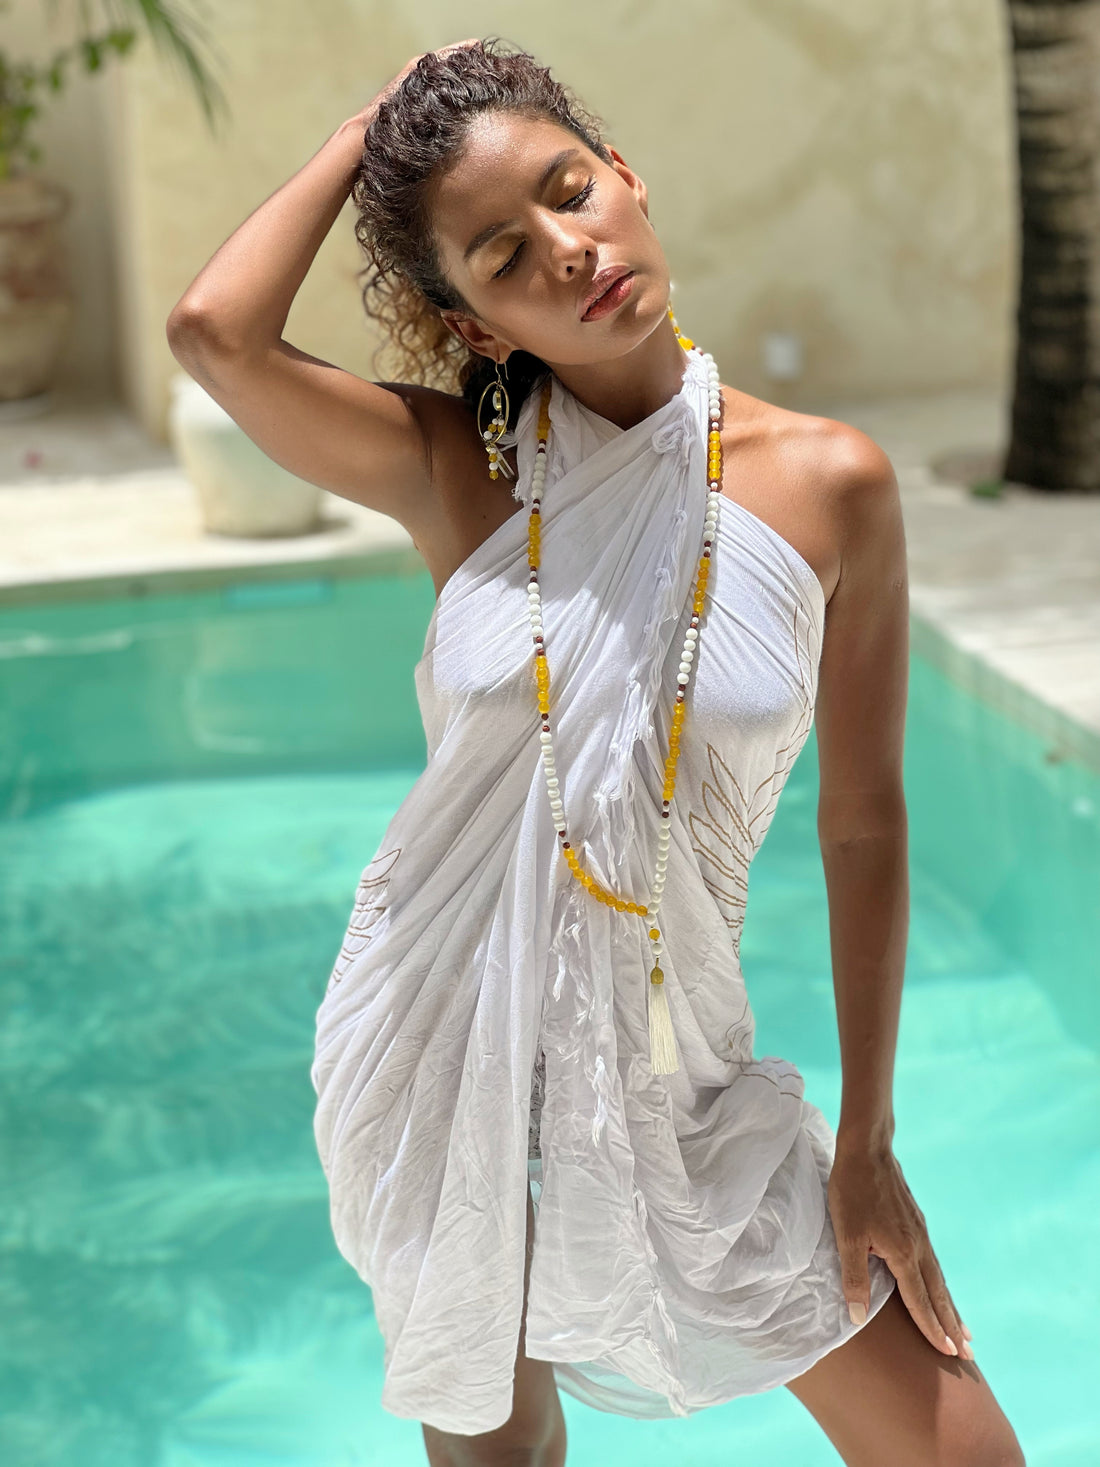 White and Gold Rise sarong cotton scarf or head band with divine mala neads necklace from unleash your inner wealth